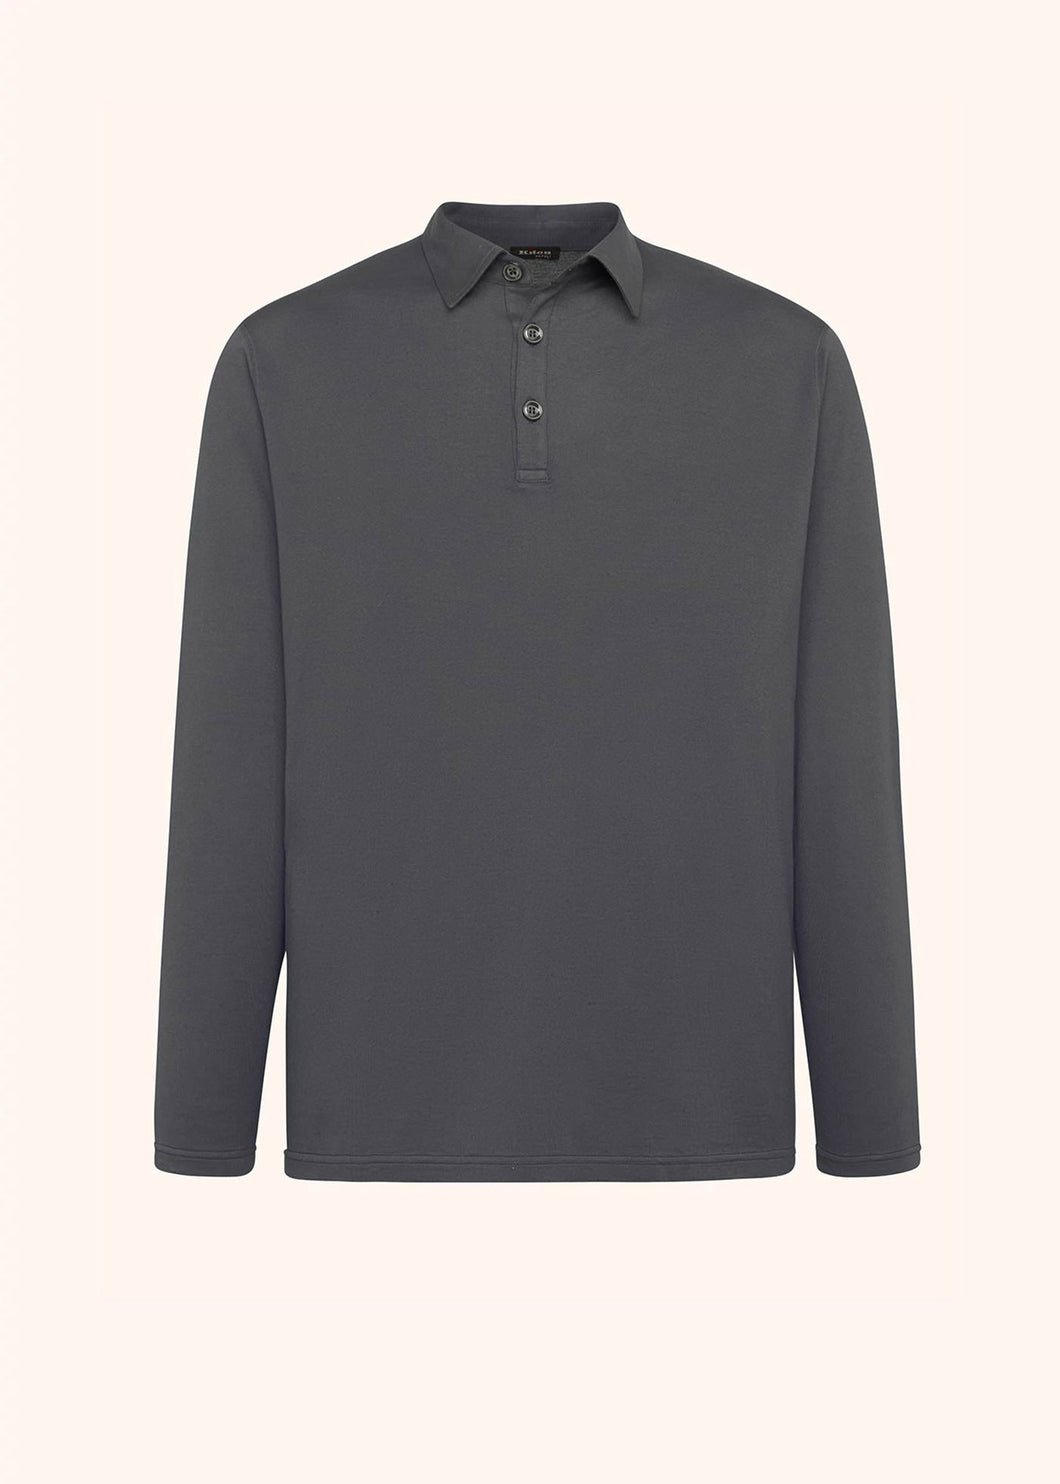 Kiton jersey polo for man, made of cotton